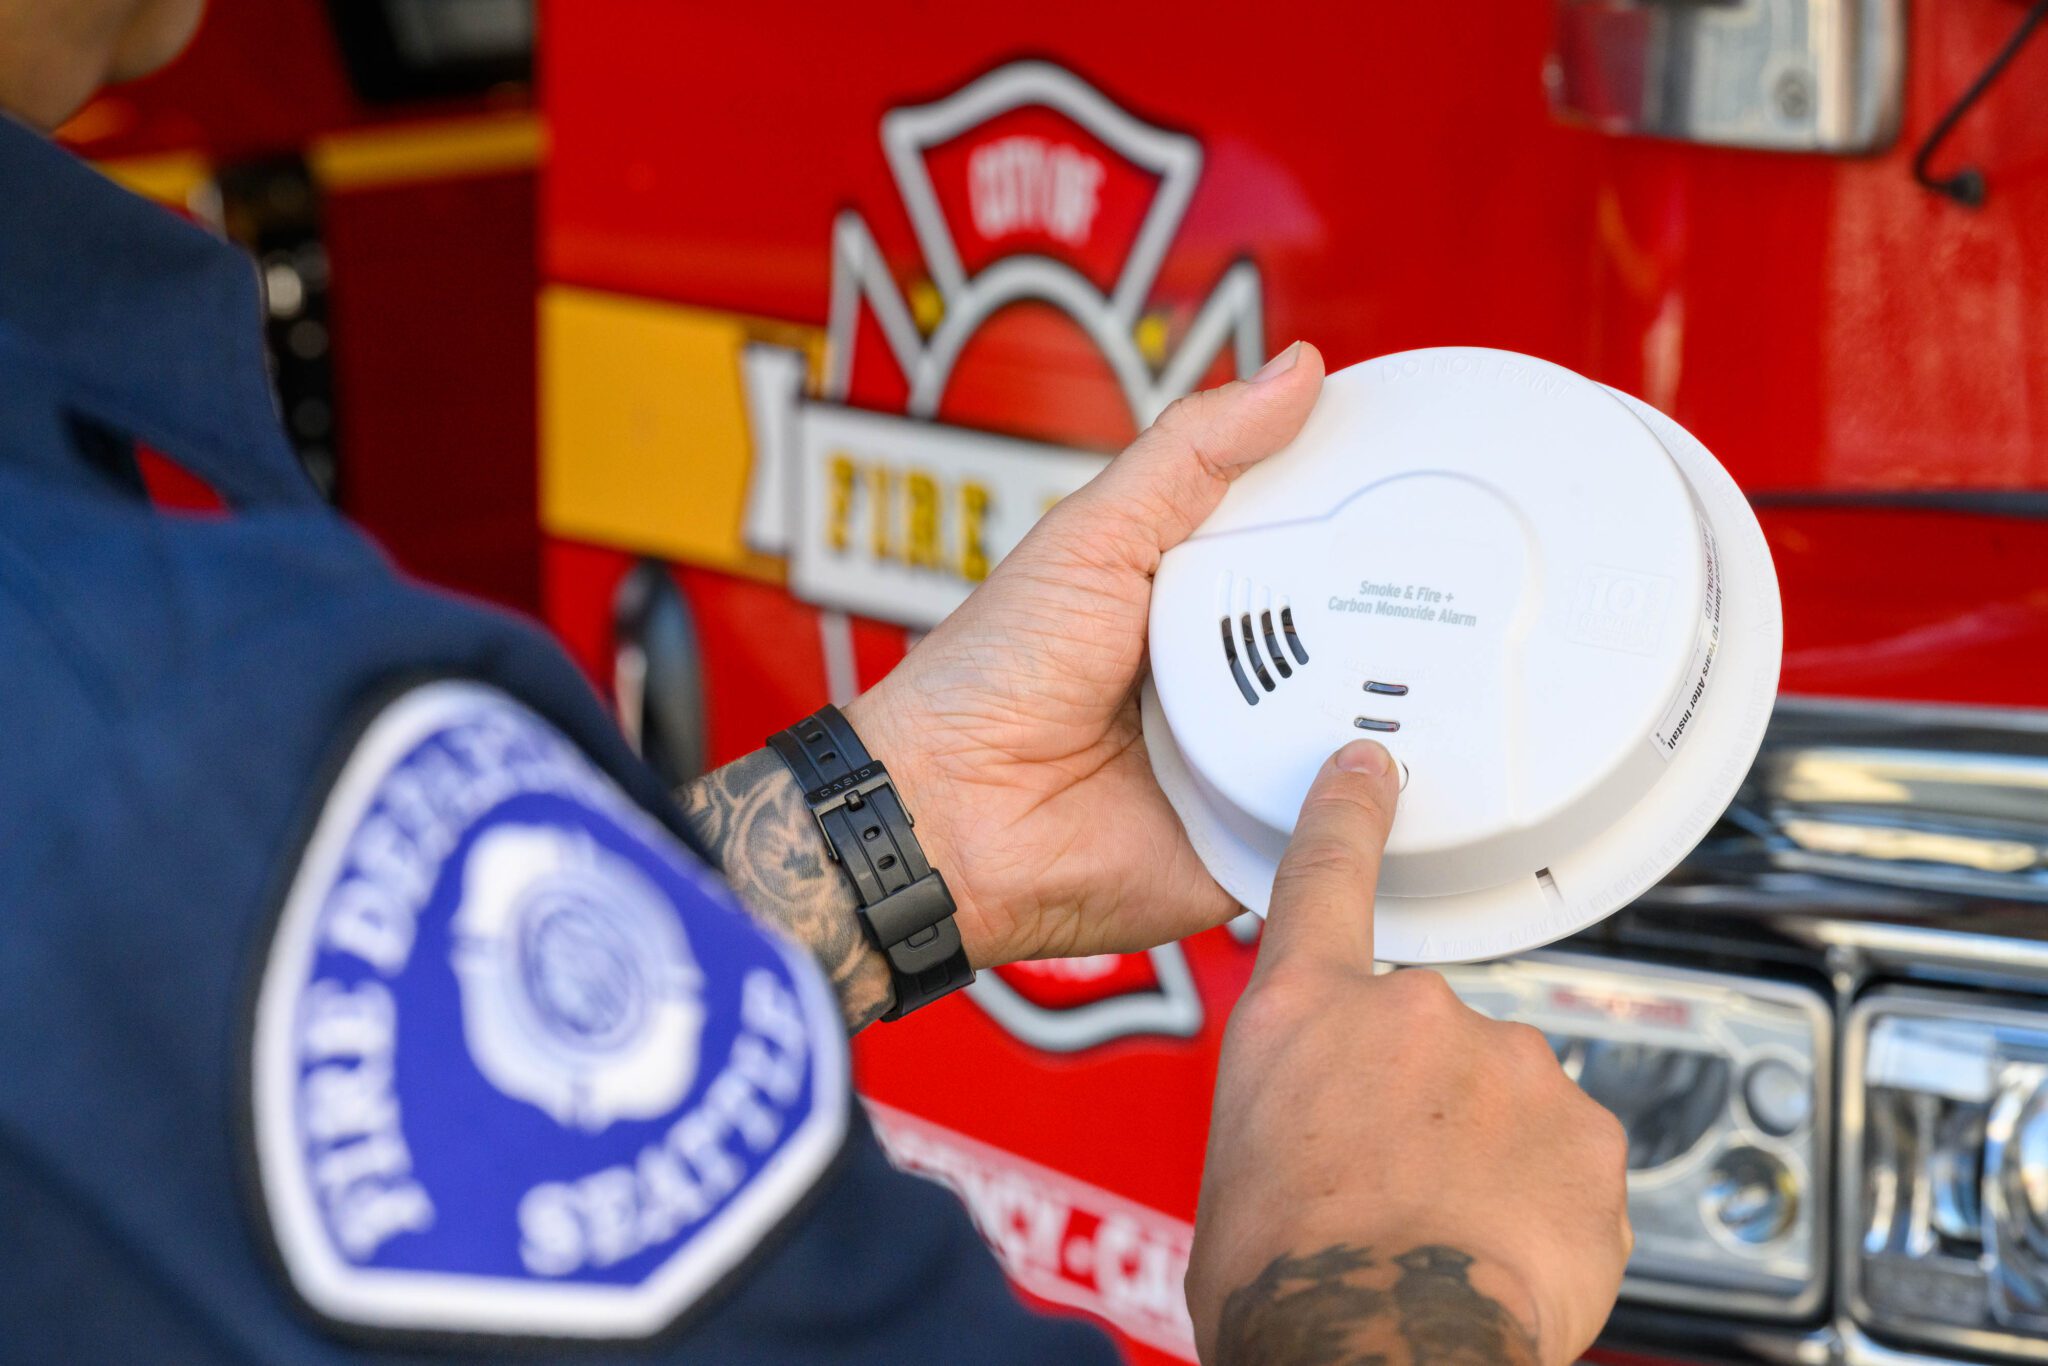 Firefighter holding a white smoke alarm in front of a red fire engine